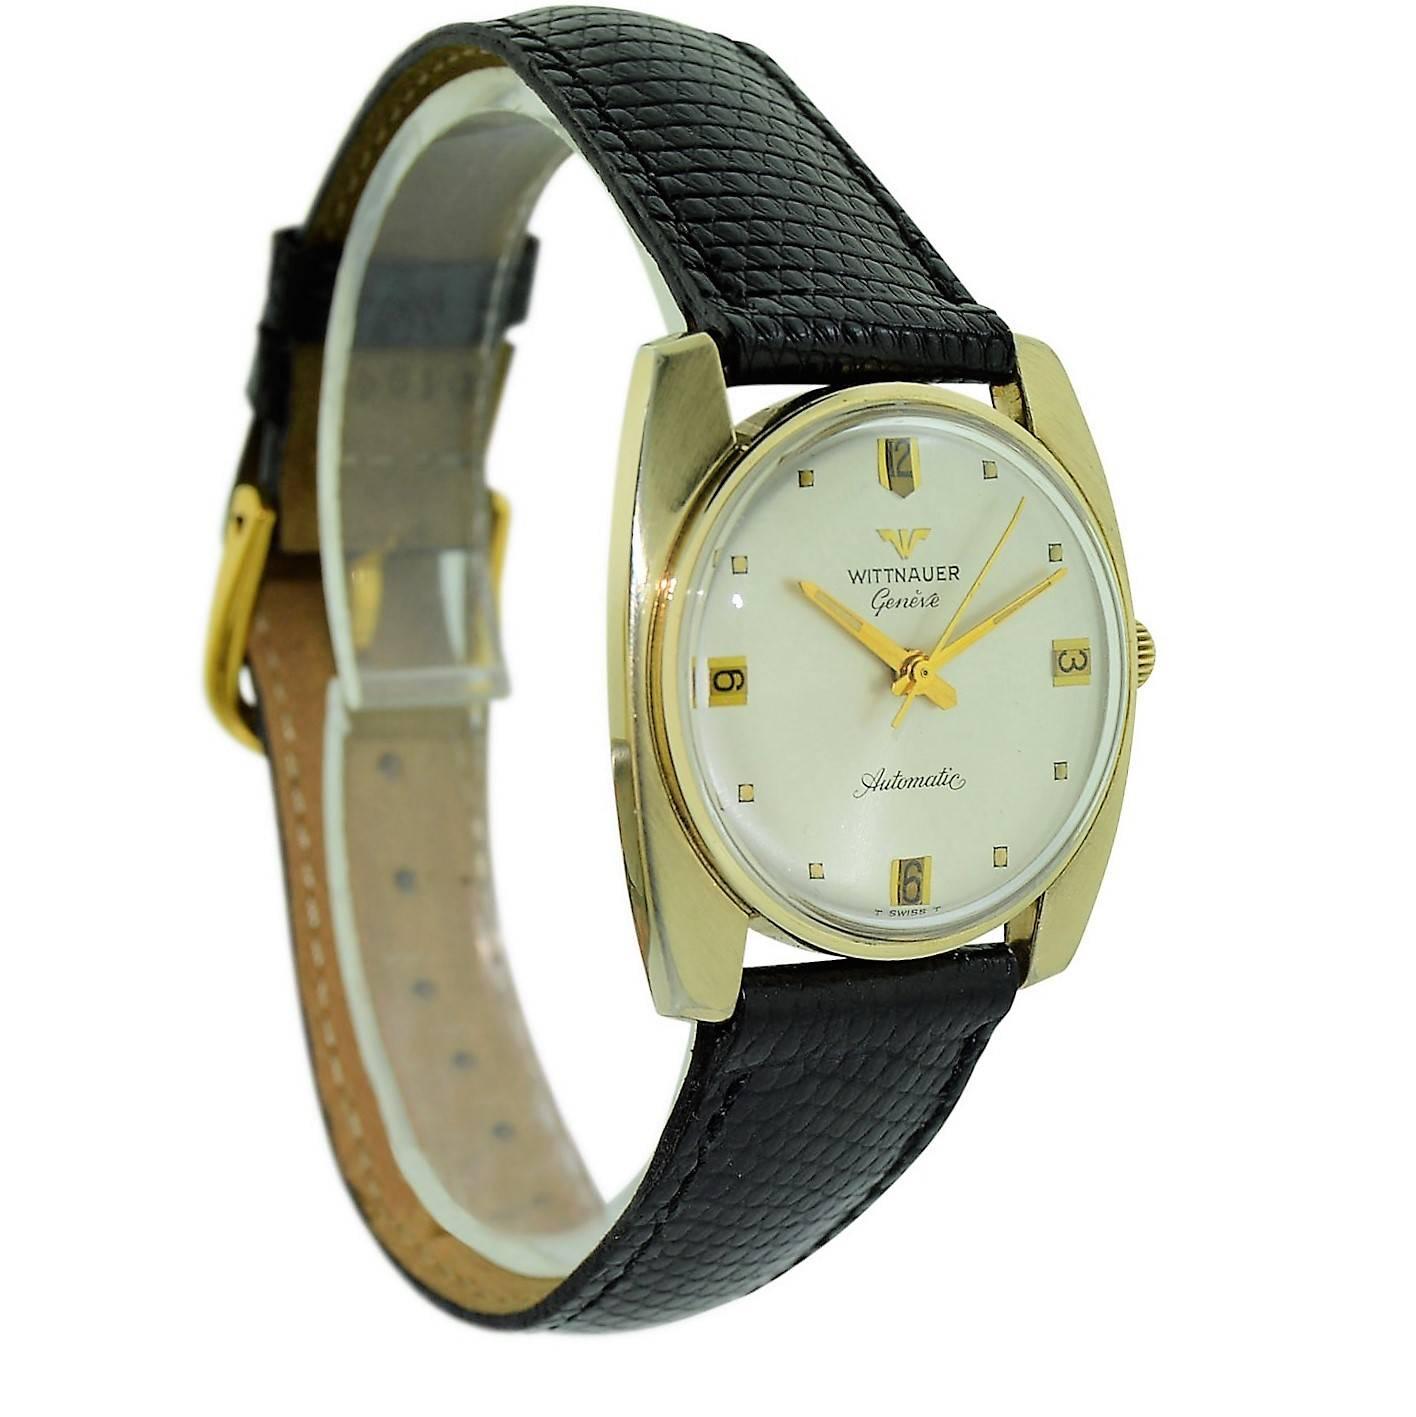 FACTORY / HOUSE:  Wittnauer  Watch Company
STYLE / REFERENCE: Art Deco 
METAL / MATERIAL: 14Kt. Yellow Gold Filled 
DIMENSIONS: 33 mm  X  31 mm
CIRCA: 1960's
MOVEMENT / CALIBER:  Automatic Winding /  17 Jewels / Cal. 911 Kas
DIAL / HANDS:  Original